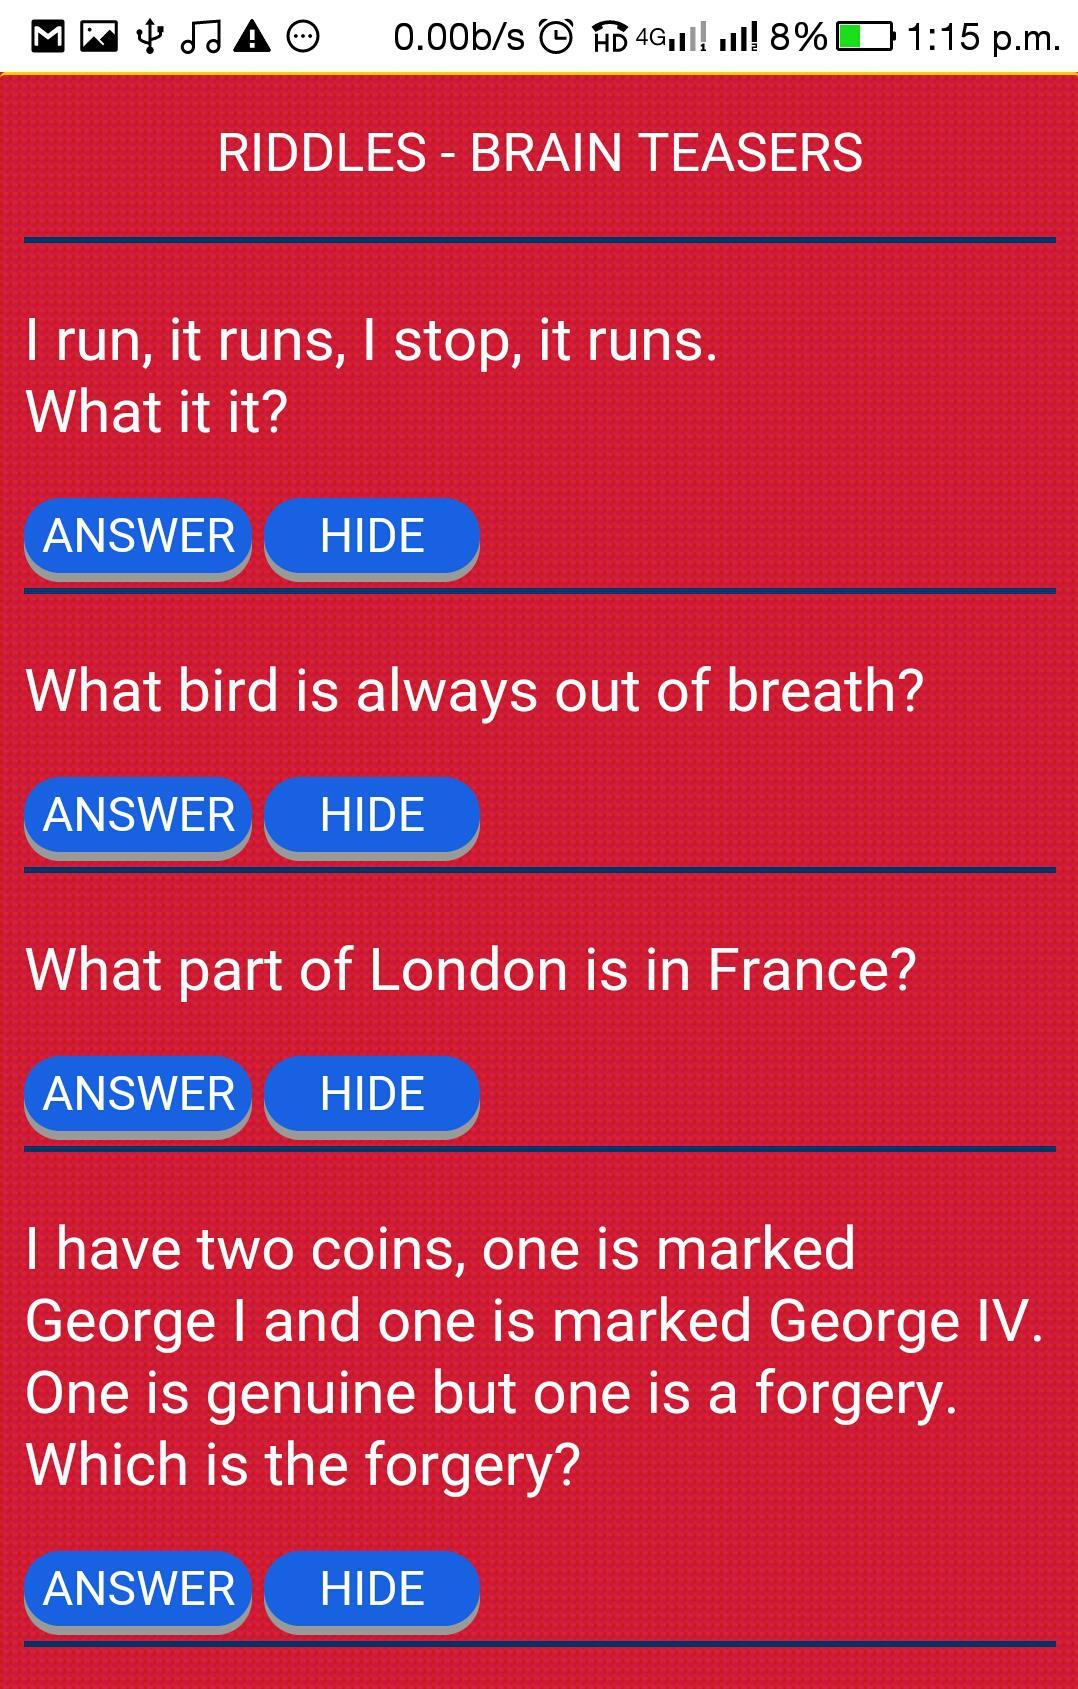 English Riddles. Picture Riddles for Brains.